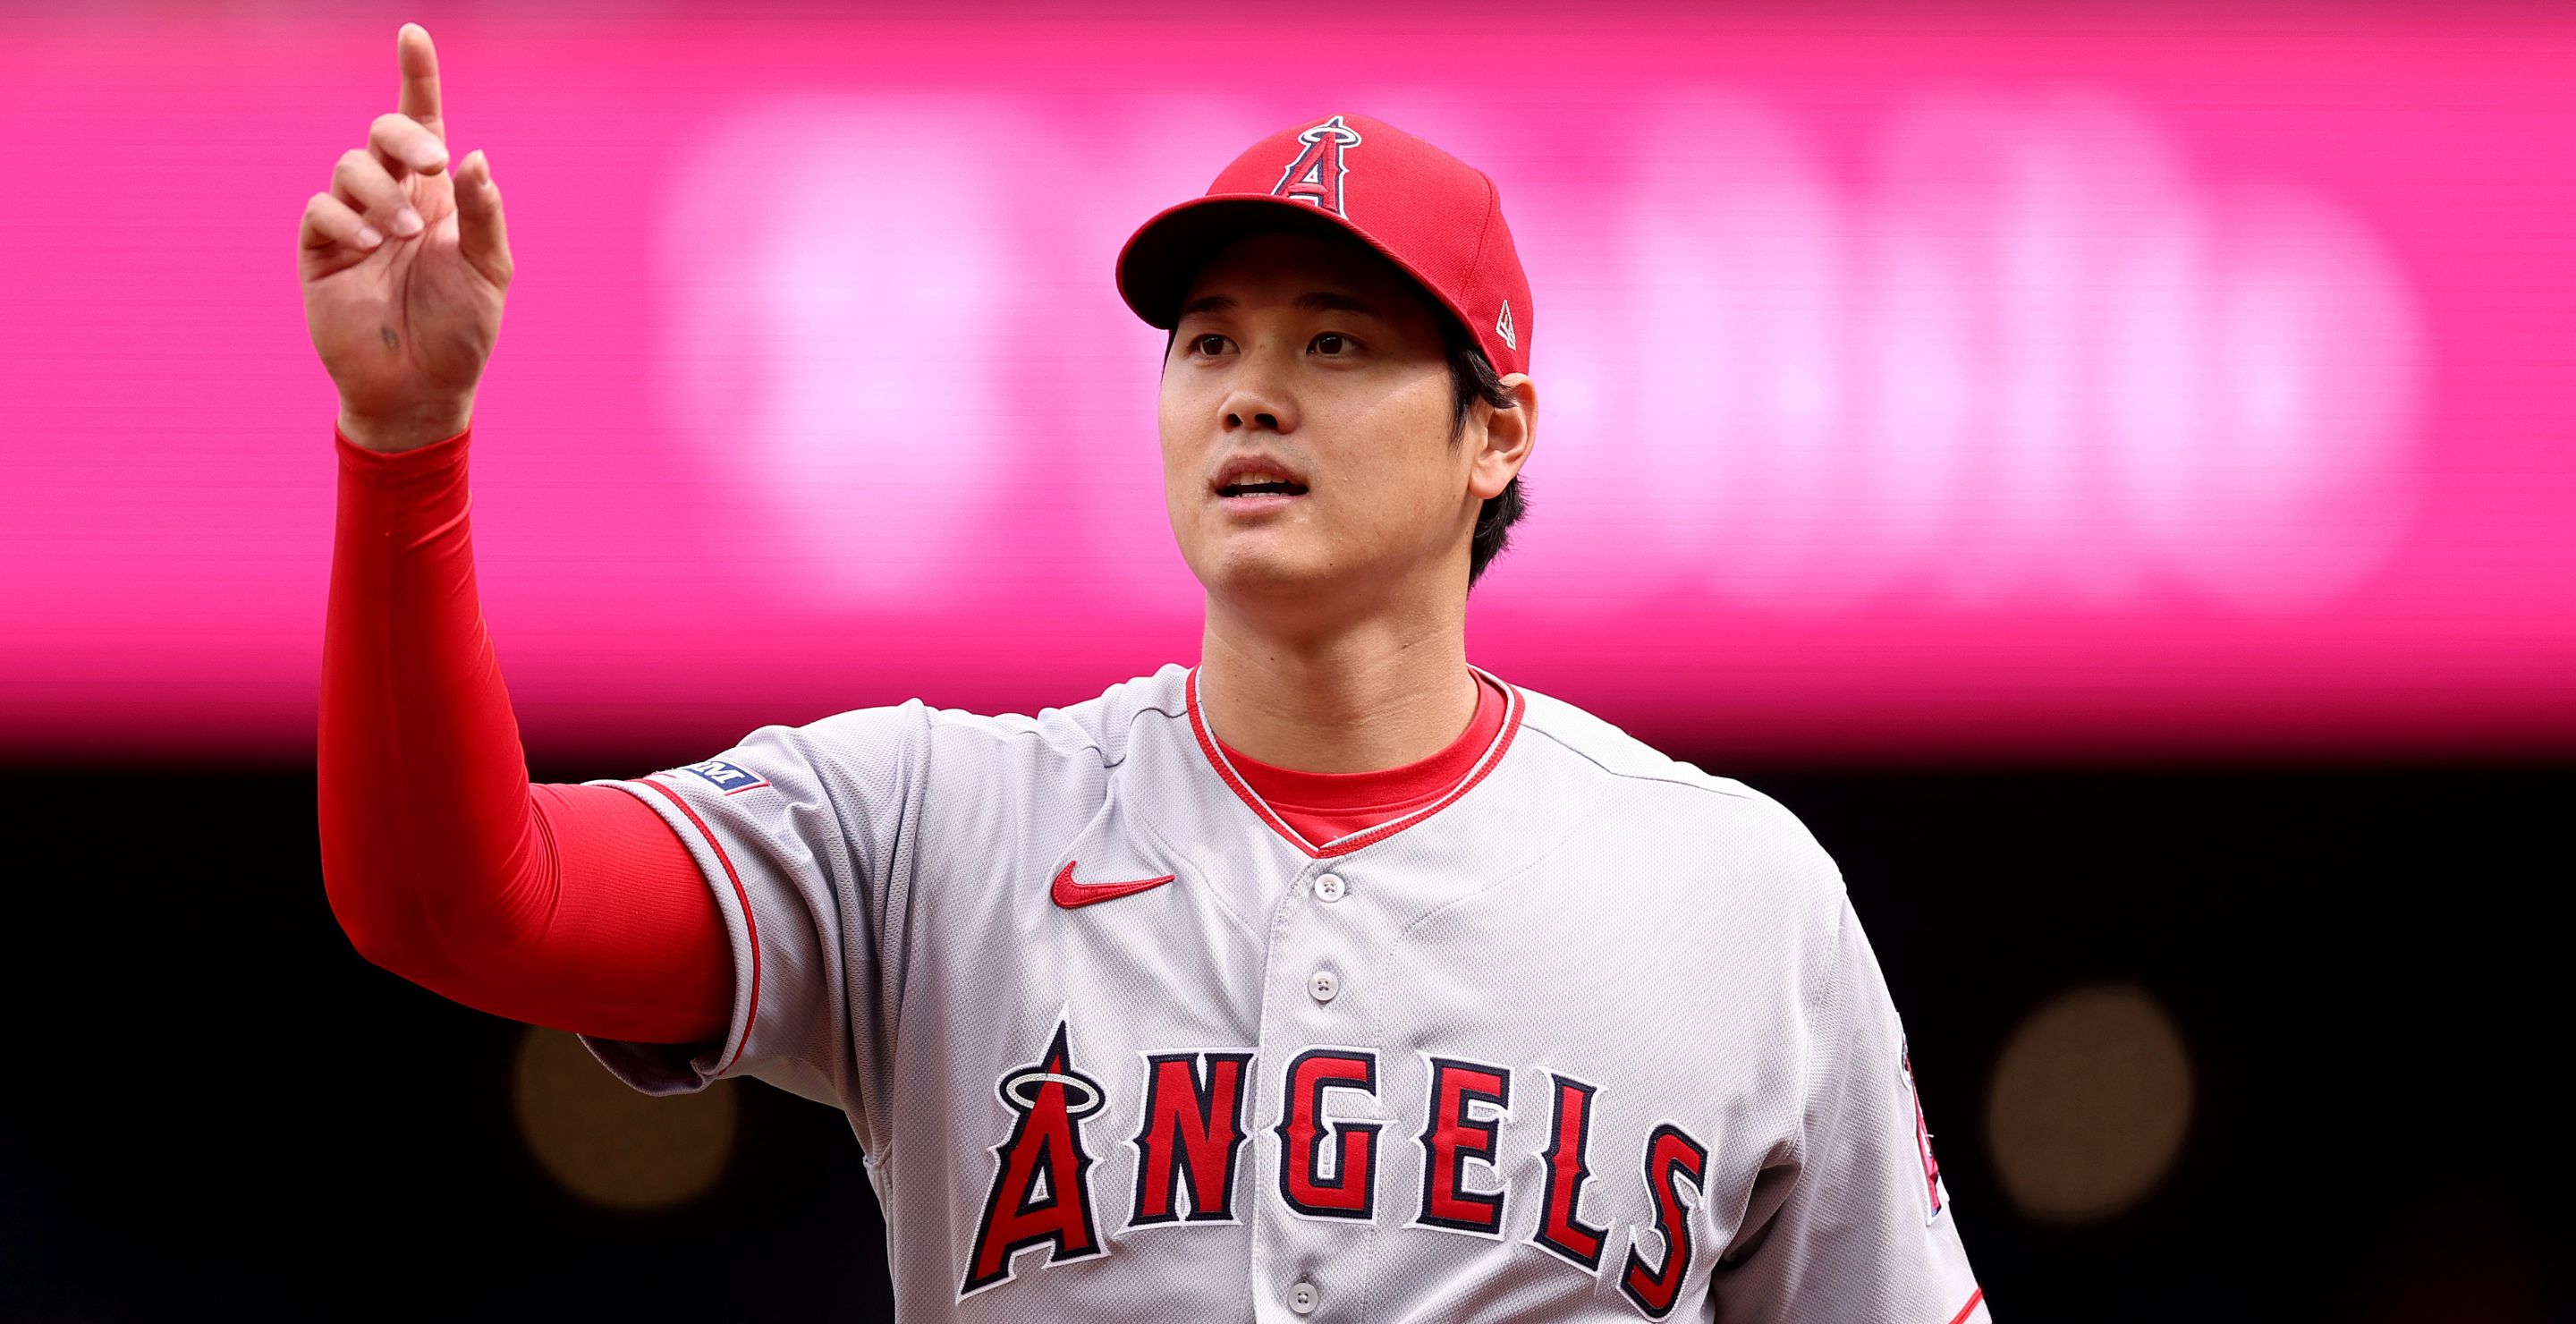 In Photos: Shohei Ohtani, from baseball loving boy in Japan to MLB